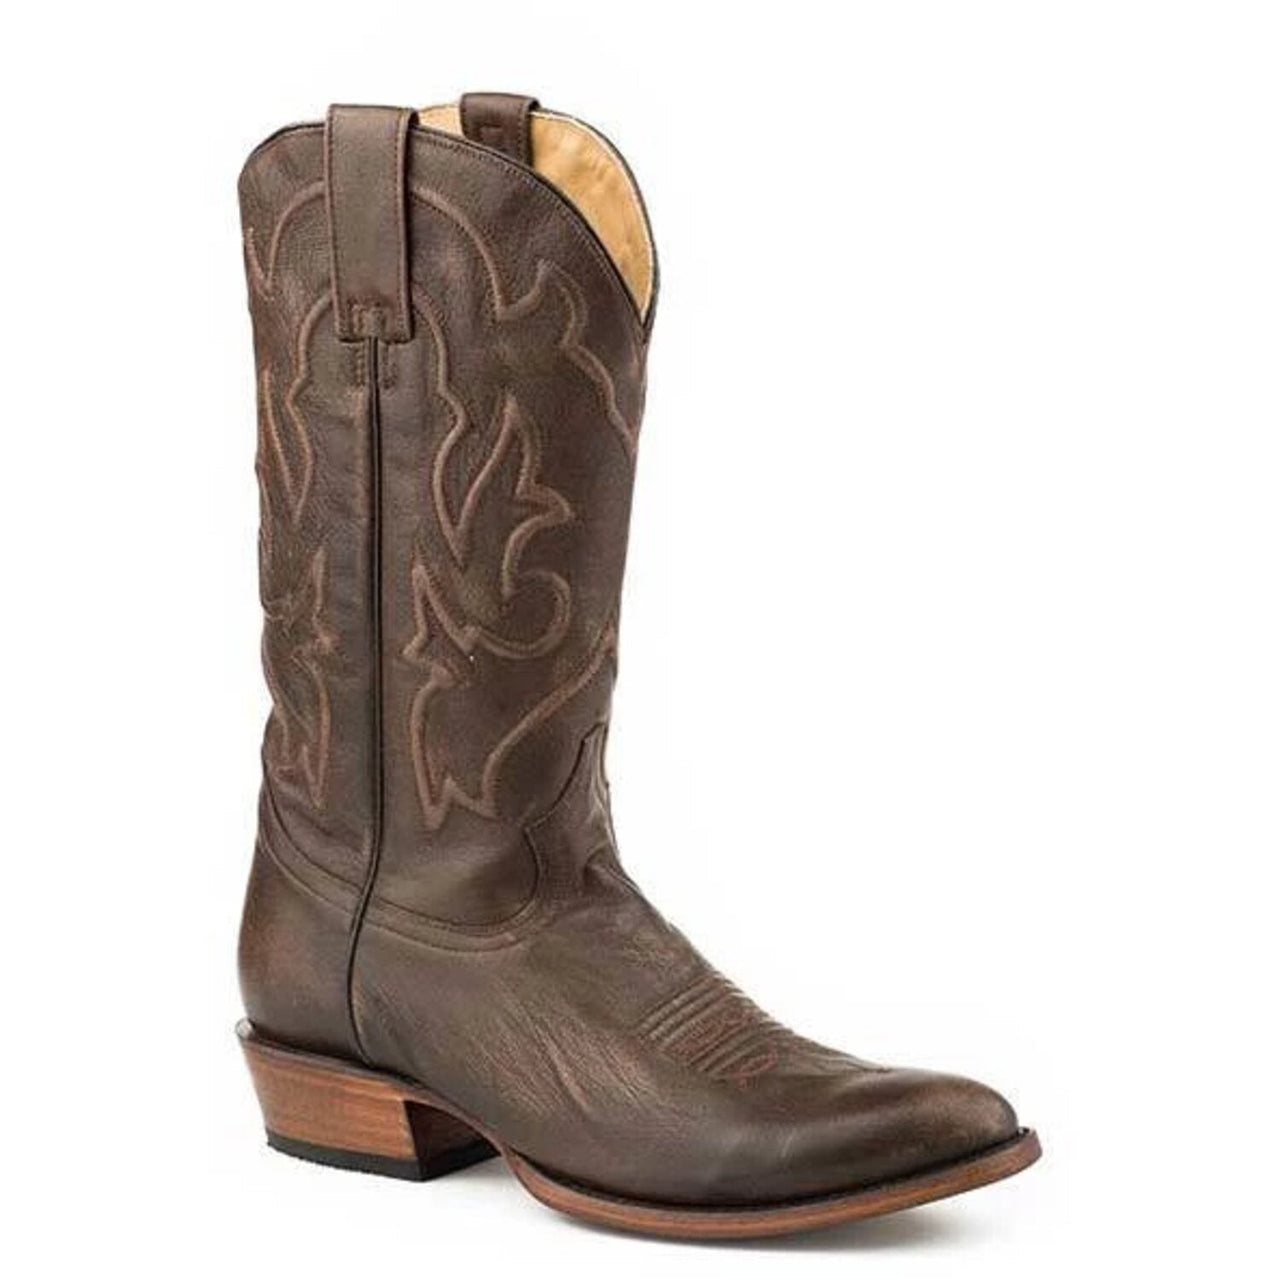 Men's Stetson Carlisle Leather Boots Handcrafted Brown - yeehawcowboy